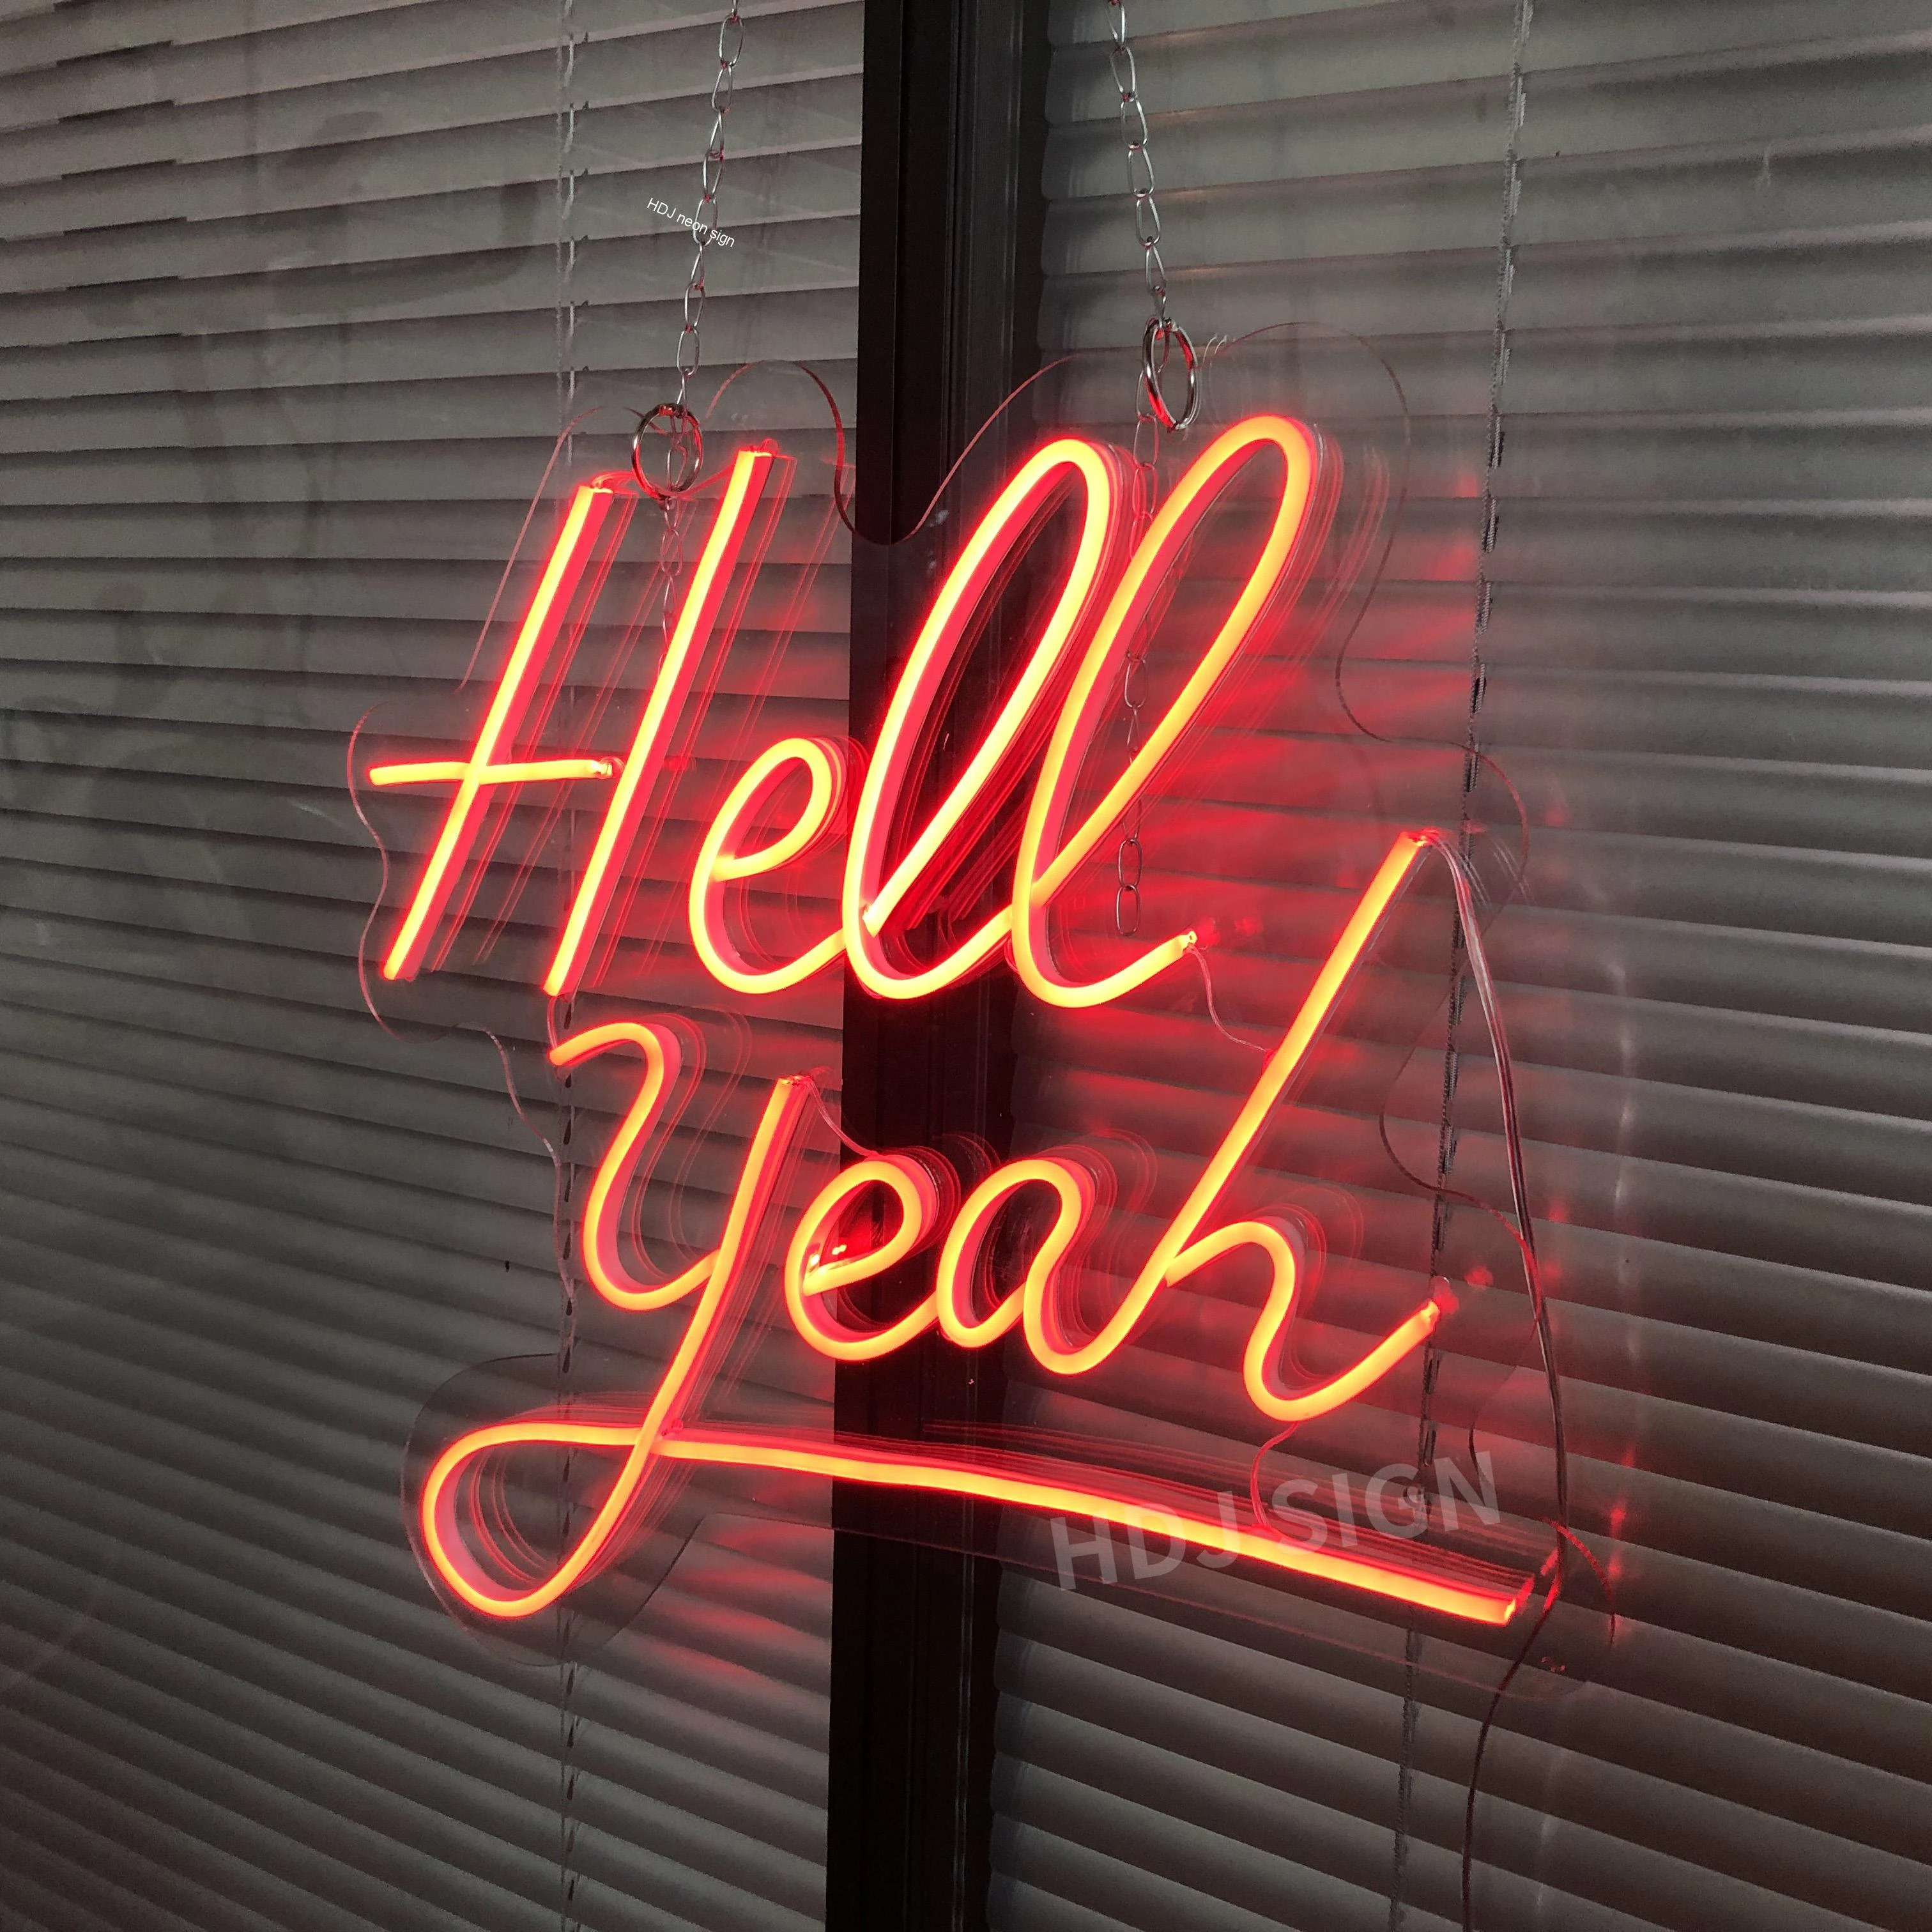 Hell Yeah Real Neon Sign Beer Bar Light Home Decor Hand Made Artwork 